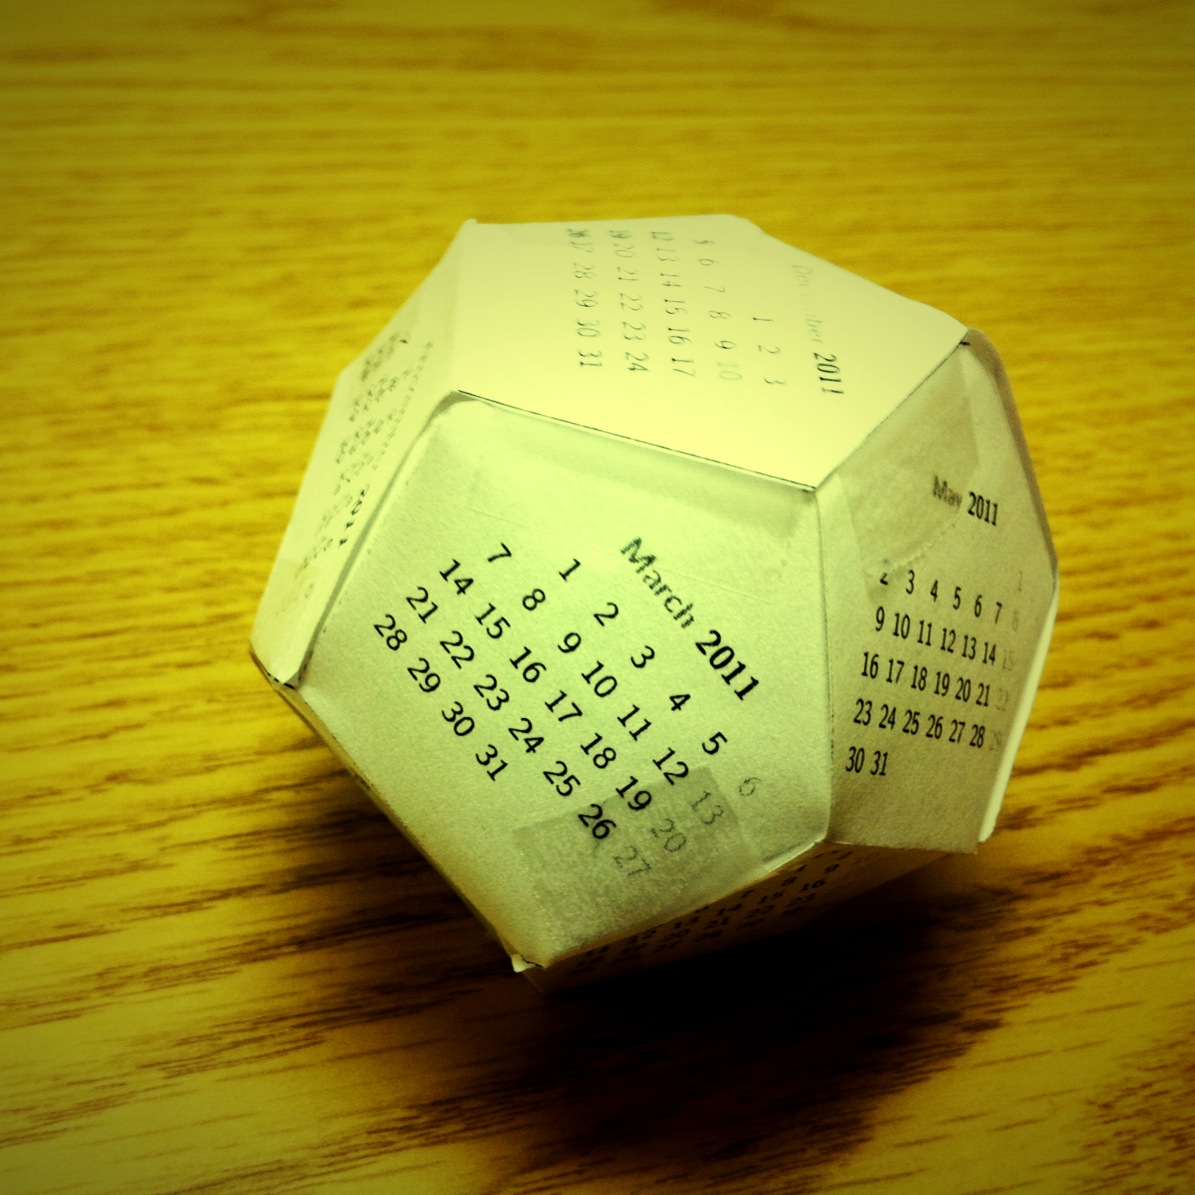 constructed 3-D dodecahedron calendar